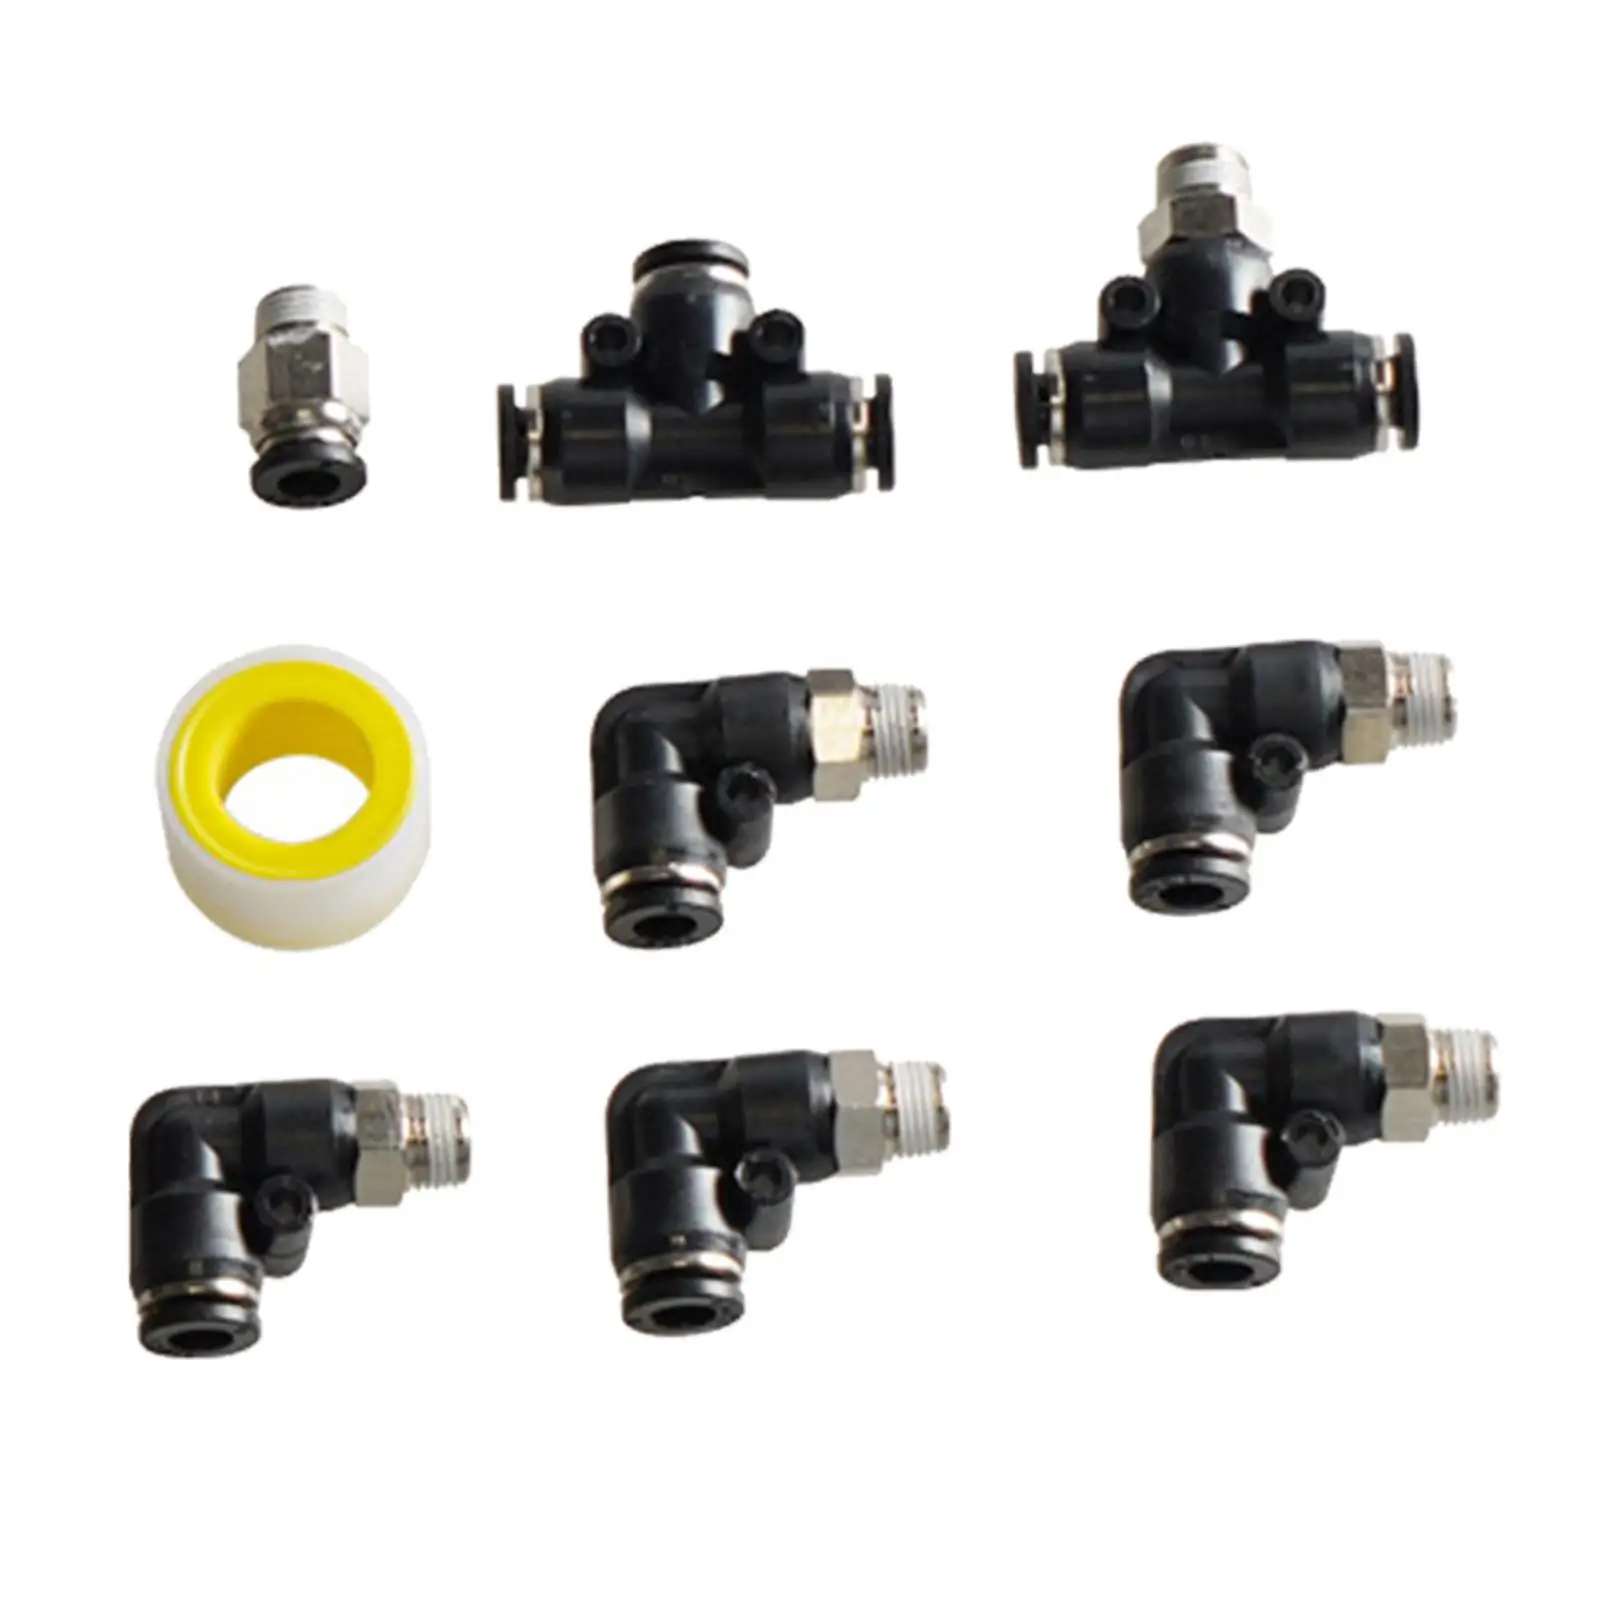 Turbo Wastegate Solenoid Easy to Install Spare Parts Replacement Assembly Accessory Black Vacuum Fitting set for Turbo Vehicles